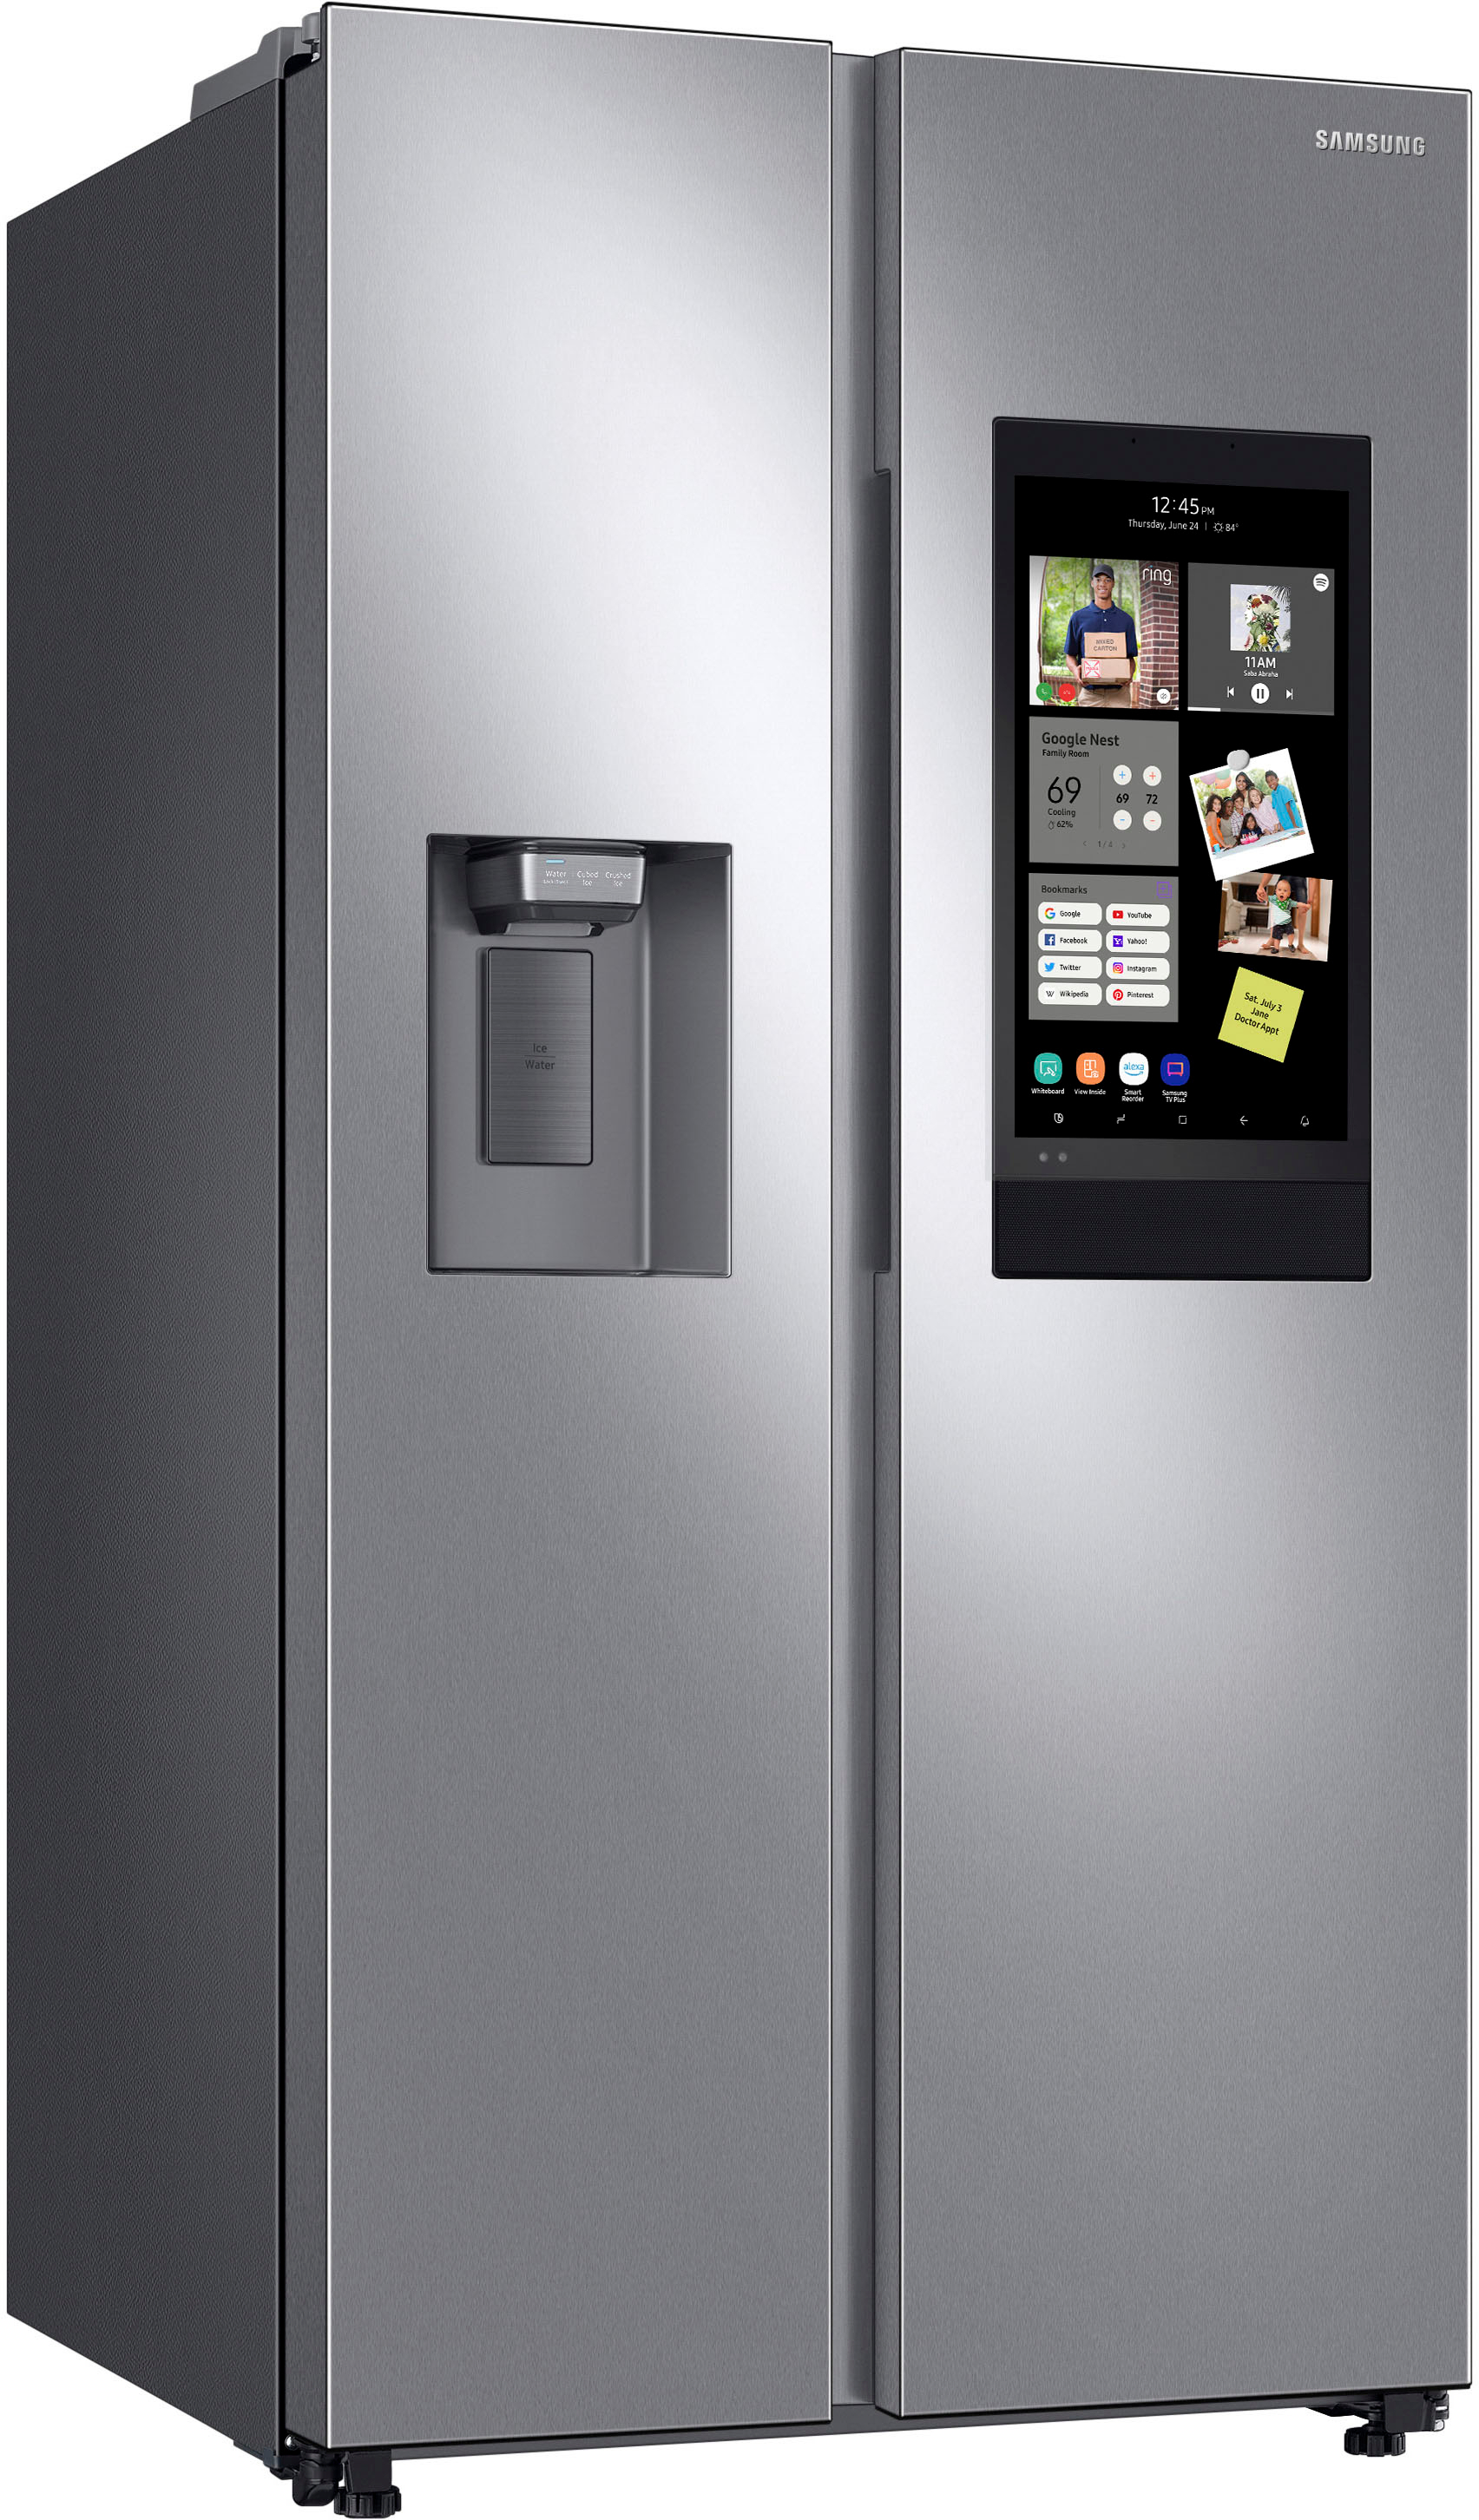 Angle View: Samsung - 26.7 Cu. Ft. Side-by-Side Refrigerator with 21.5" Touch-Screen Family Hub - Stainless steel